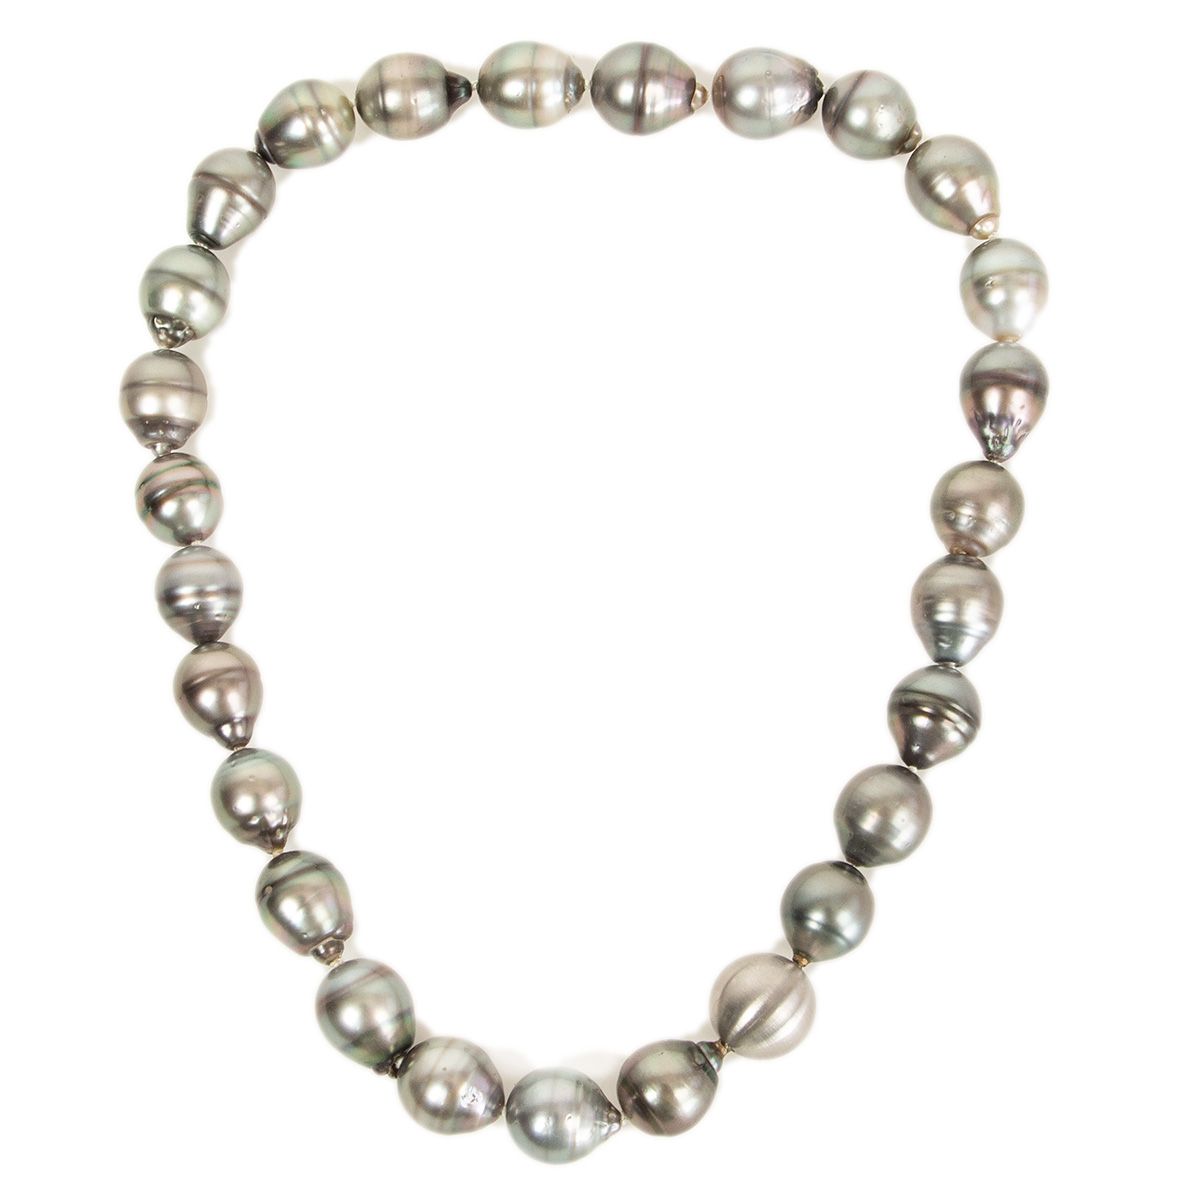 Three-strand chunky Modern Twist Cultured Freshwater Baroque Pearl necklace